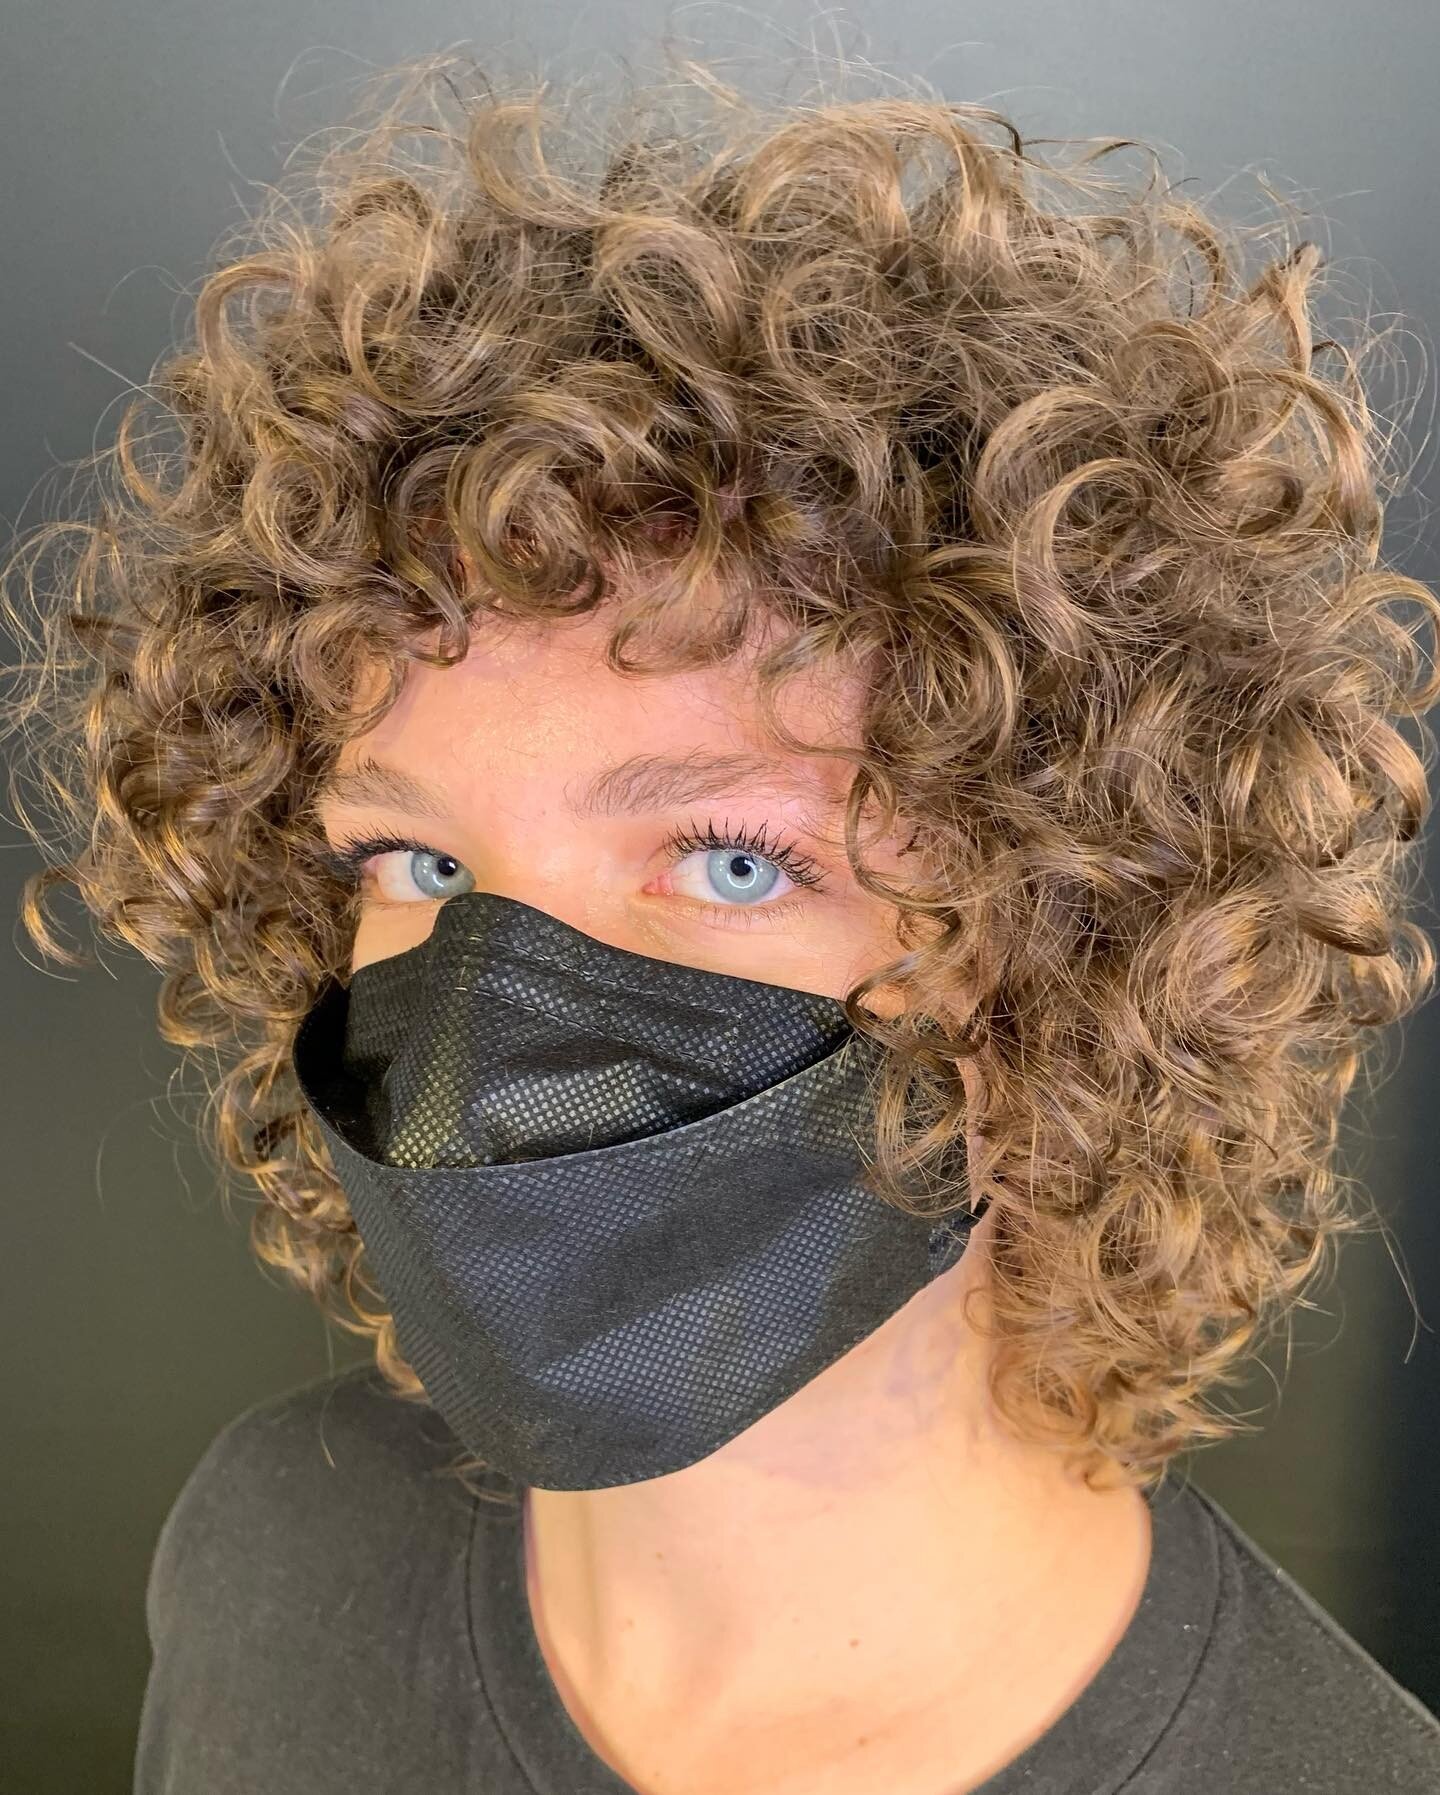 Georgia is an actor. Just a clean up cus they&rsquo;re growing their hair. Interesting note: they&rsquo;re getting more work since going natural. Nice&hellip; #curlmaster #curlyhair #type3